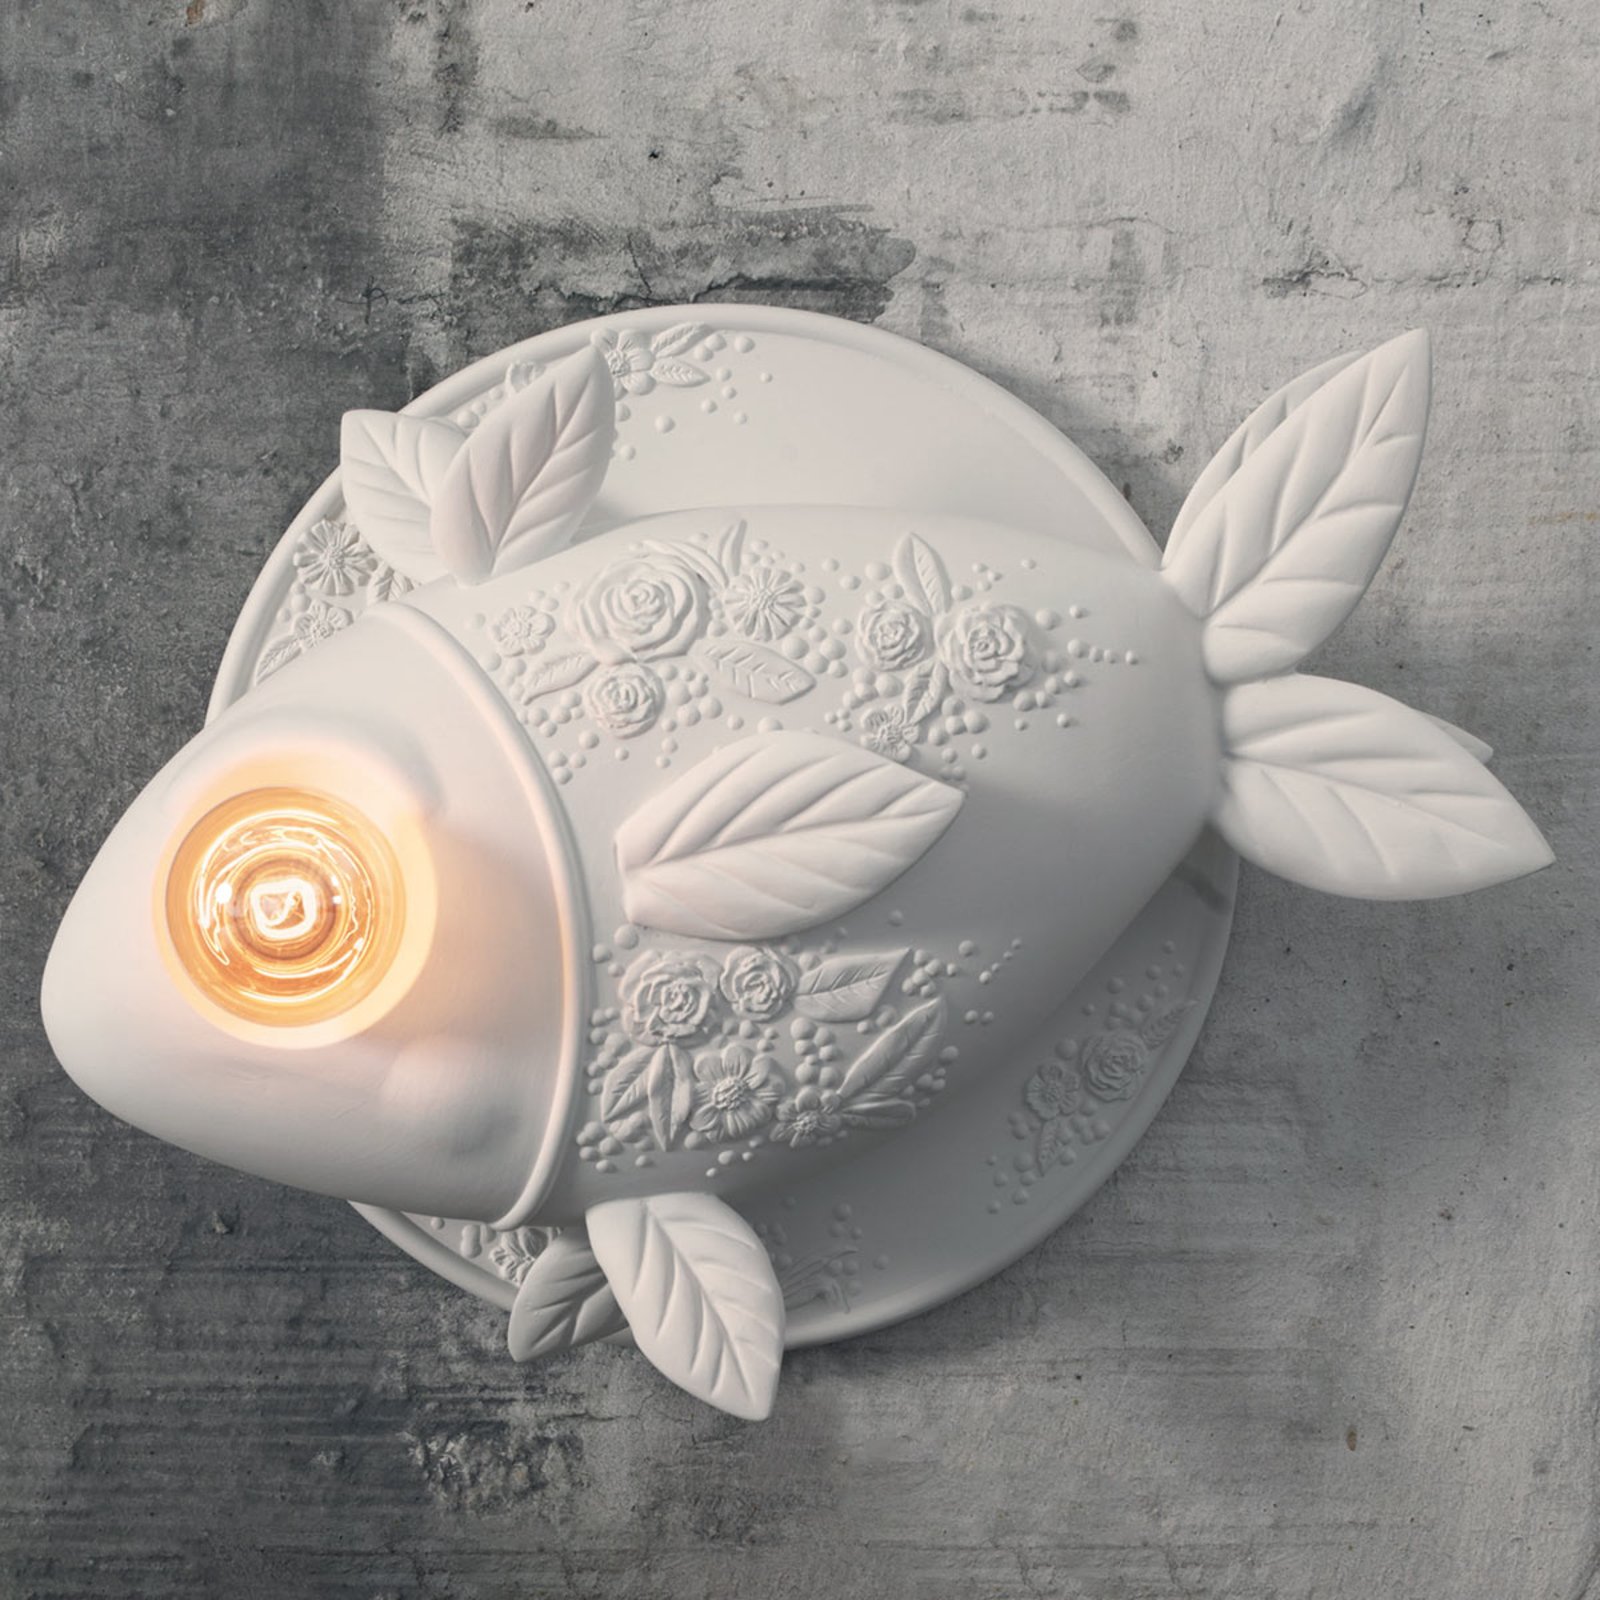 Designer wall light Aprile in the shape of a fish